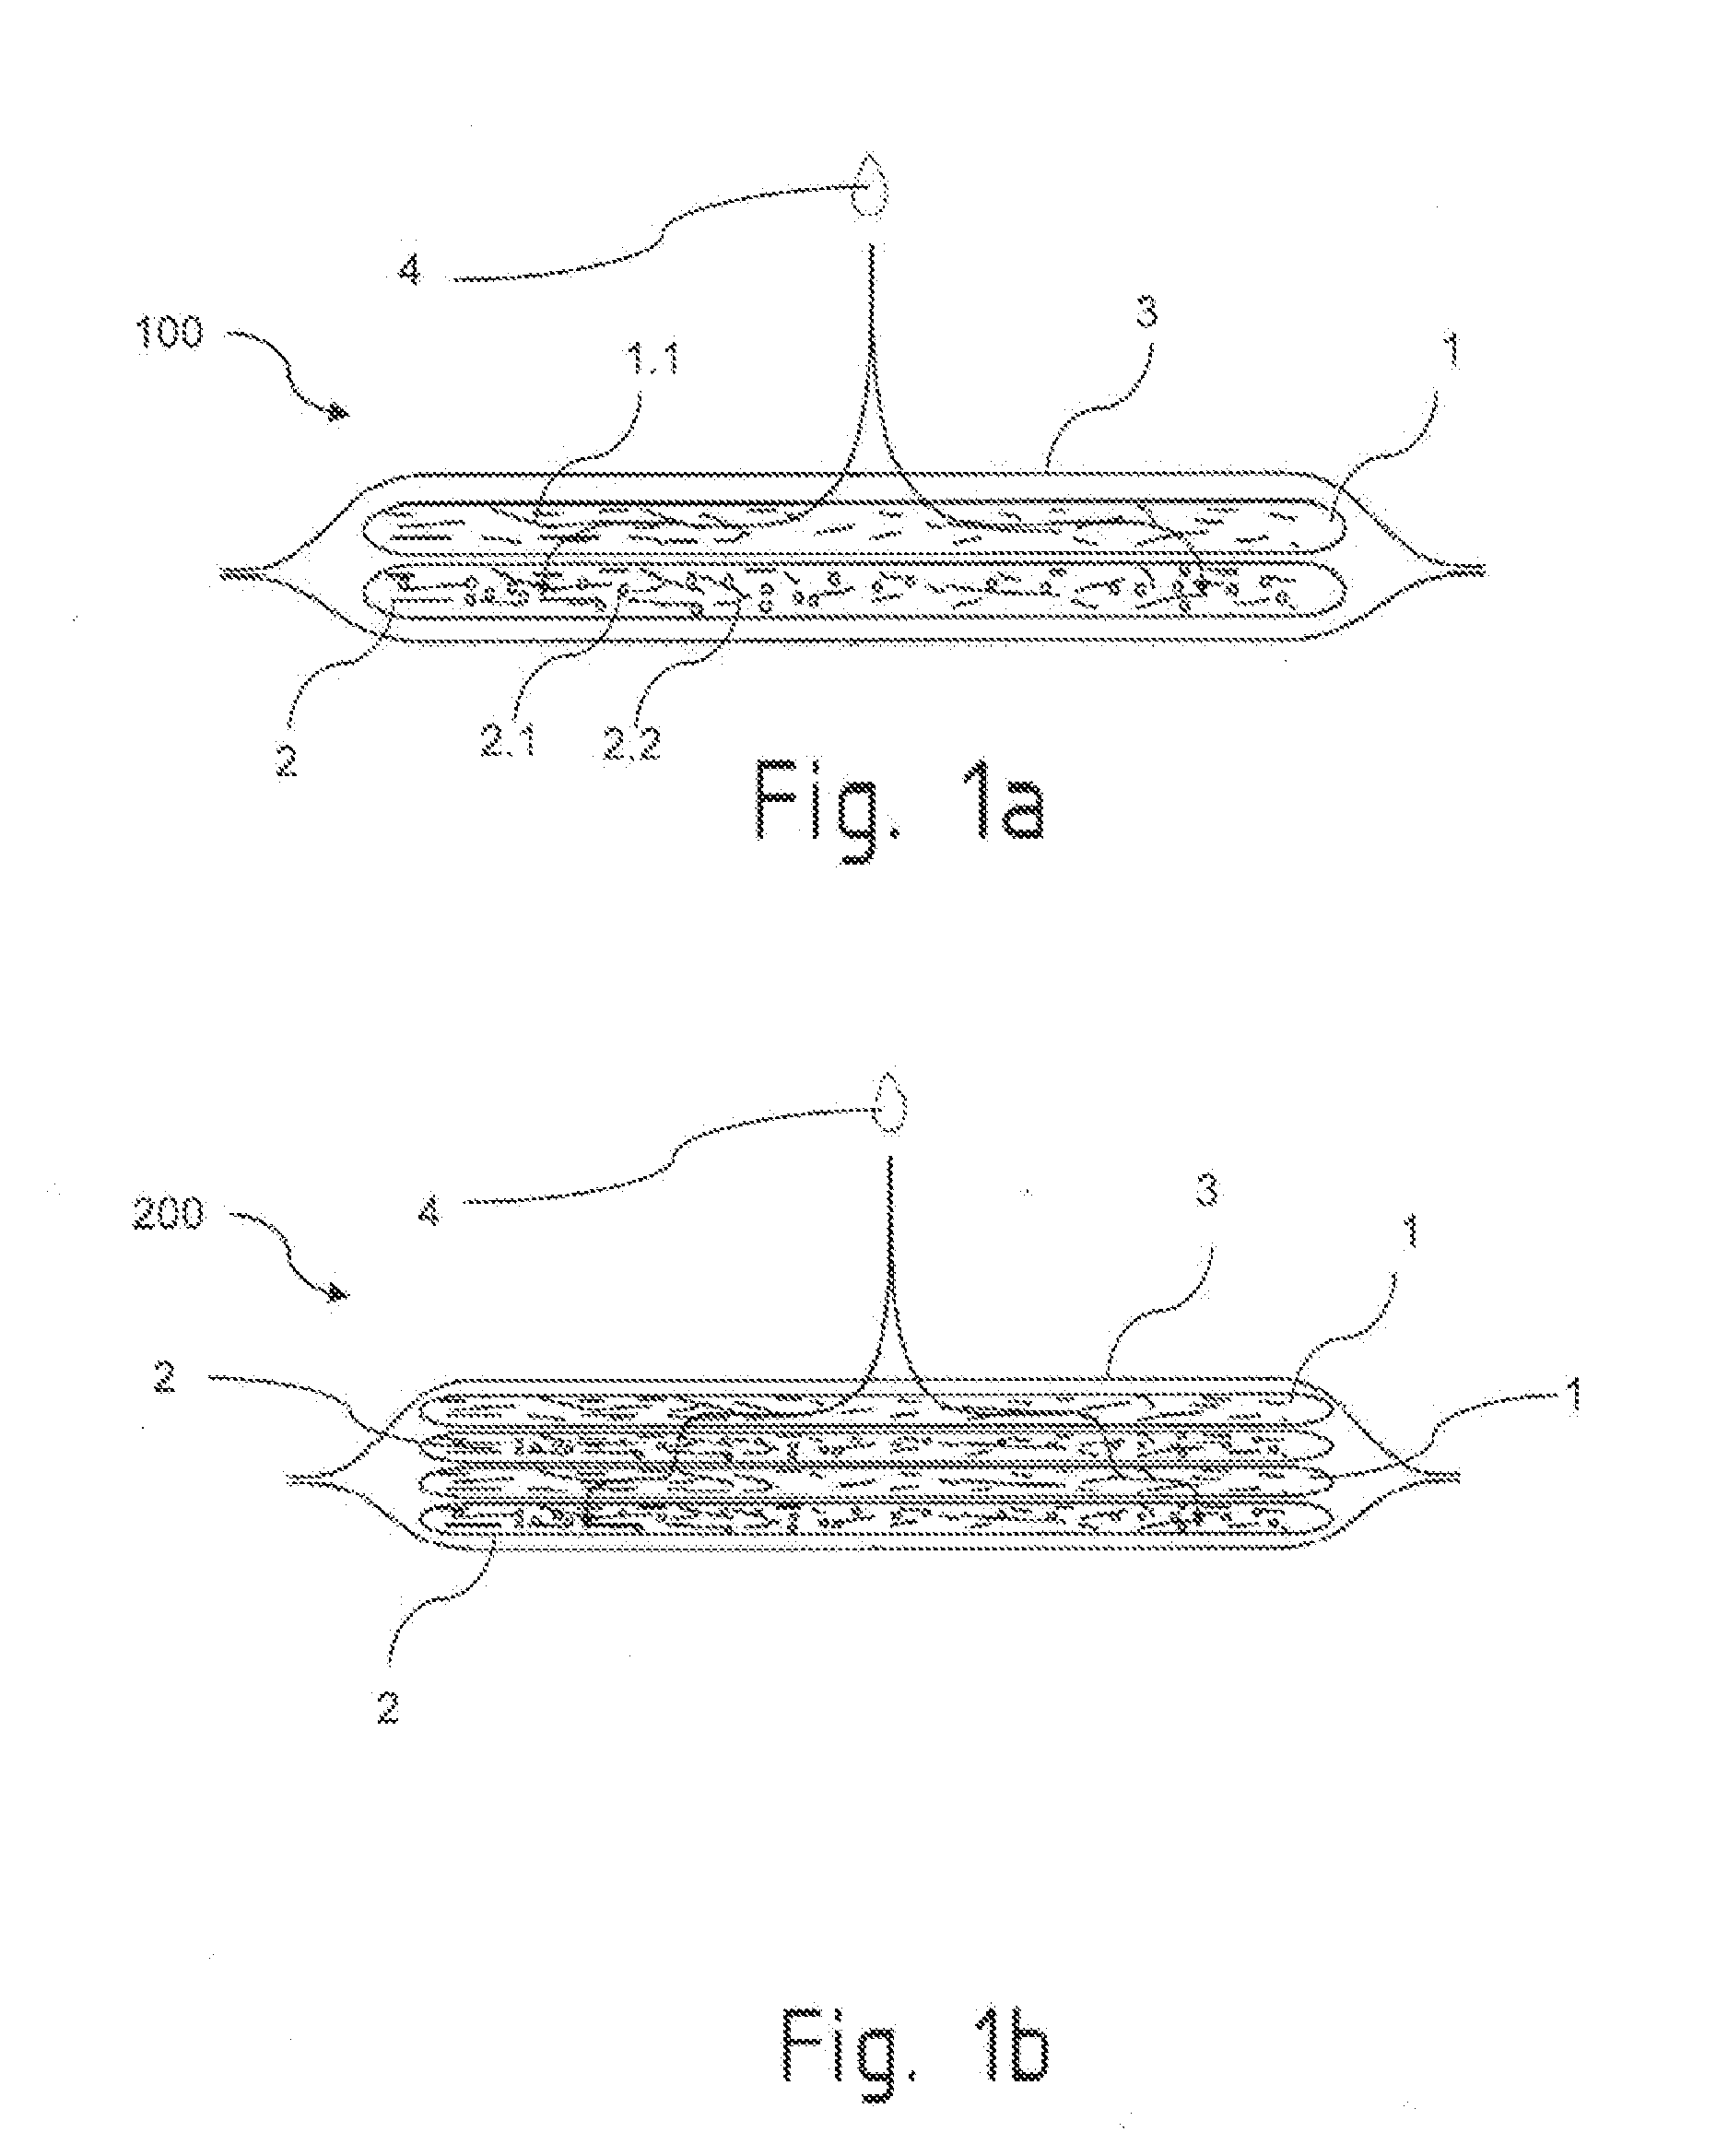 Wound care article, comprising a portion of modified natural fibers or synthetic fibers